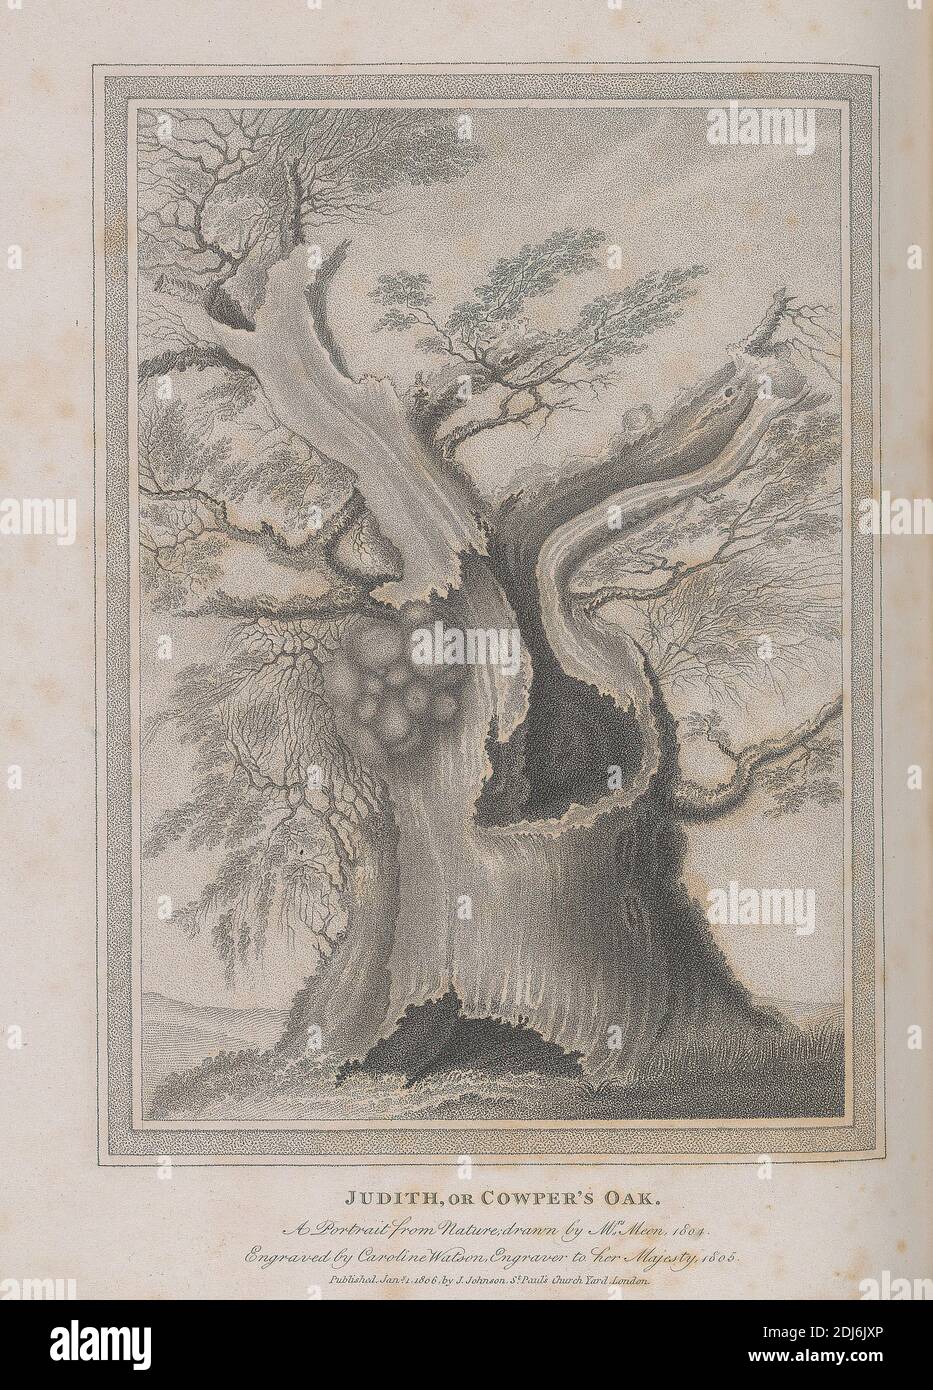 Judith, or Cowper's Oak, Print made by Caroline Watson, 1760–1814, British, after Margaret Meen, active ca. 1775–1824, British, Published by Joseph Johnson, 1738–1809, British, Text by William Hayley, 1745–1820, British, 1803-1804, Etching and line engraving on medium, slightly textured, cream wove paper, Binding: 11 1/2 inches (29.2 cm), Sheet: 11 3/8 × 9 inches (28.9 × 22.9 cm), and Image: 8 7/8 × 6 7/16 inches (22.5 × 16.3 cm Stock Photo